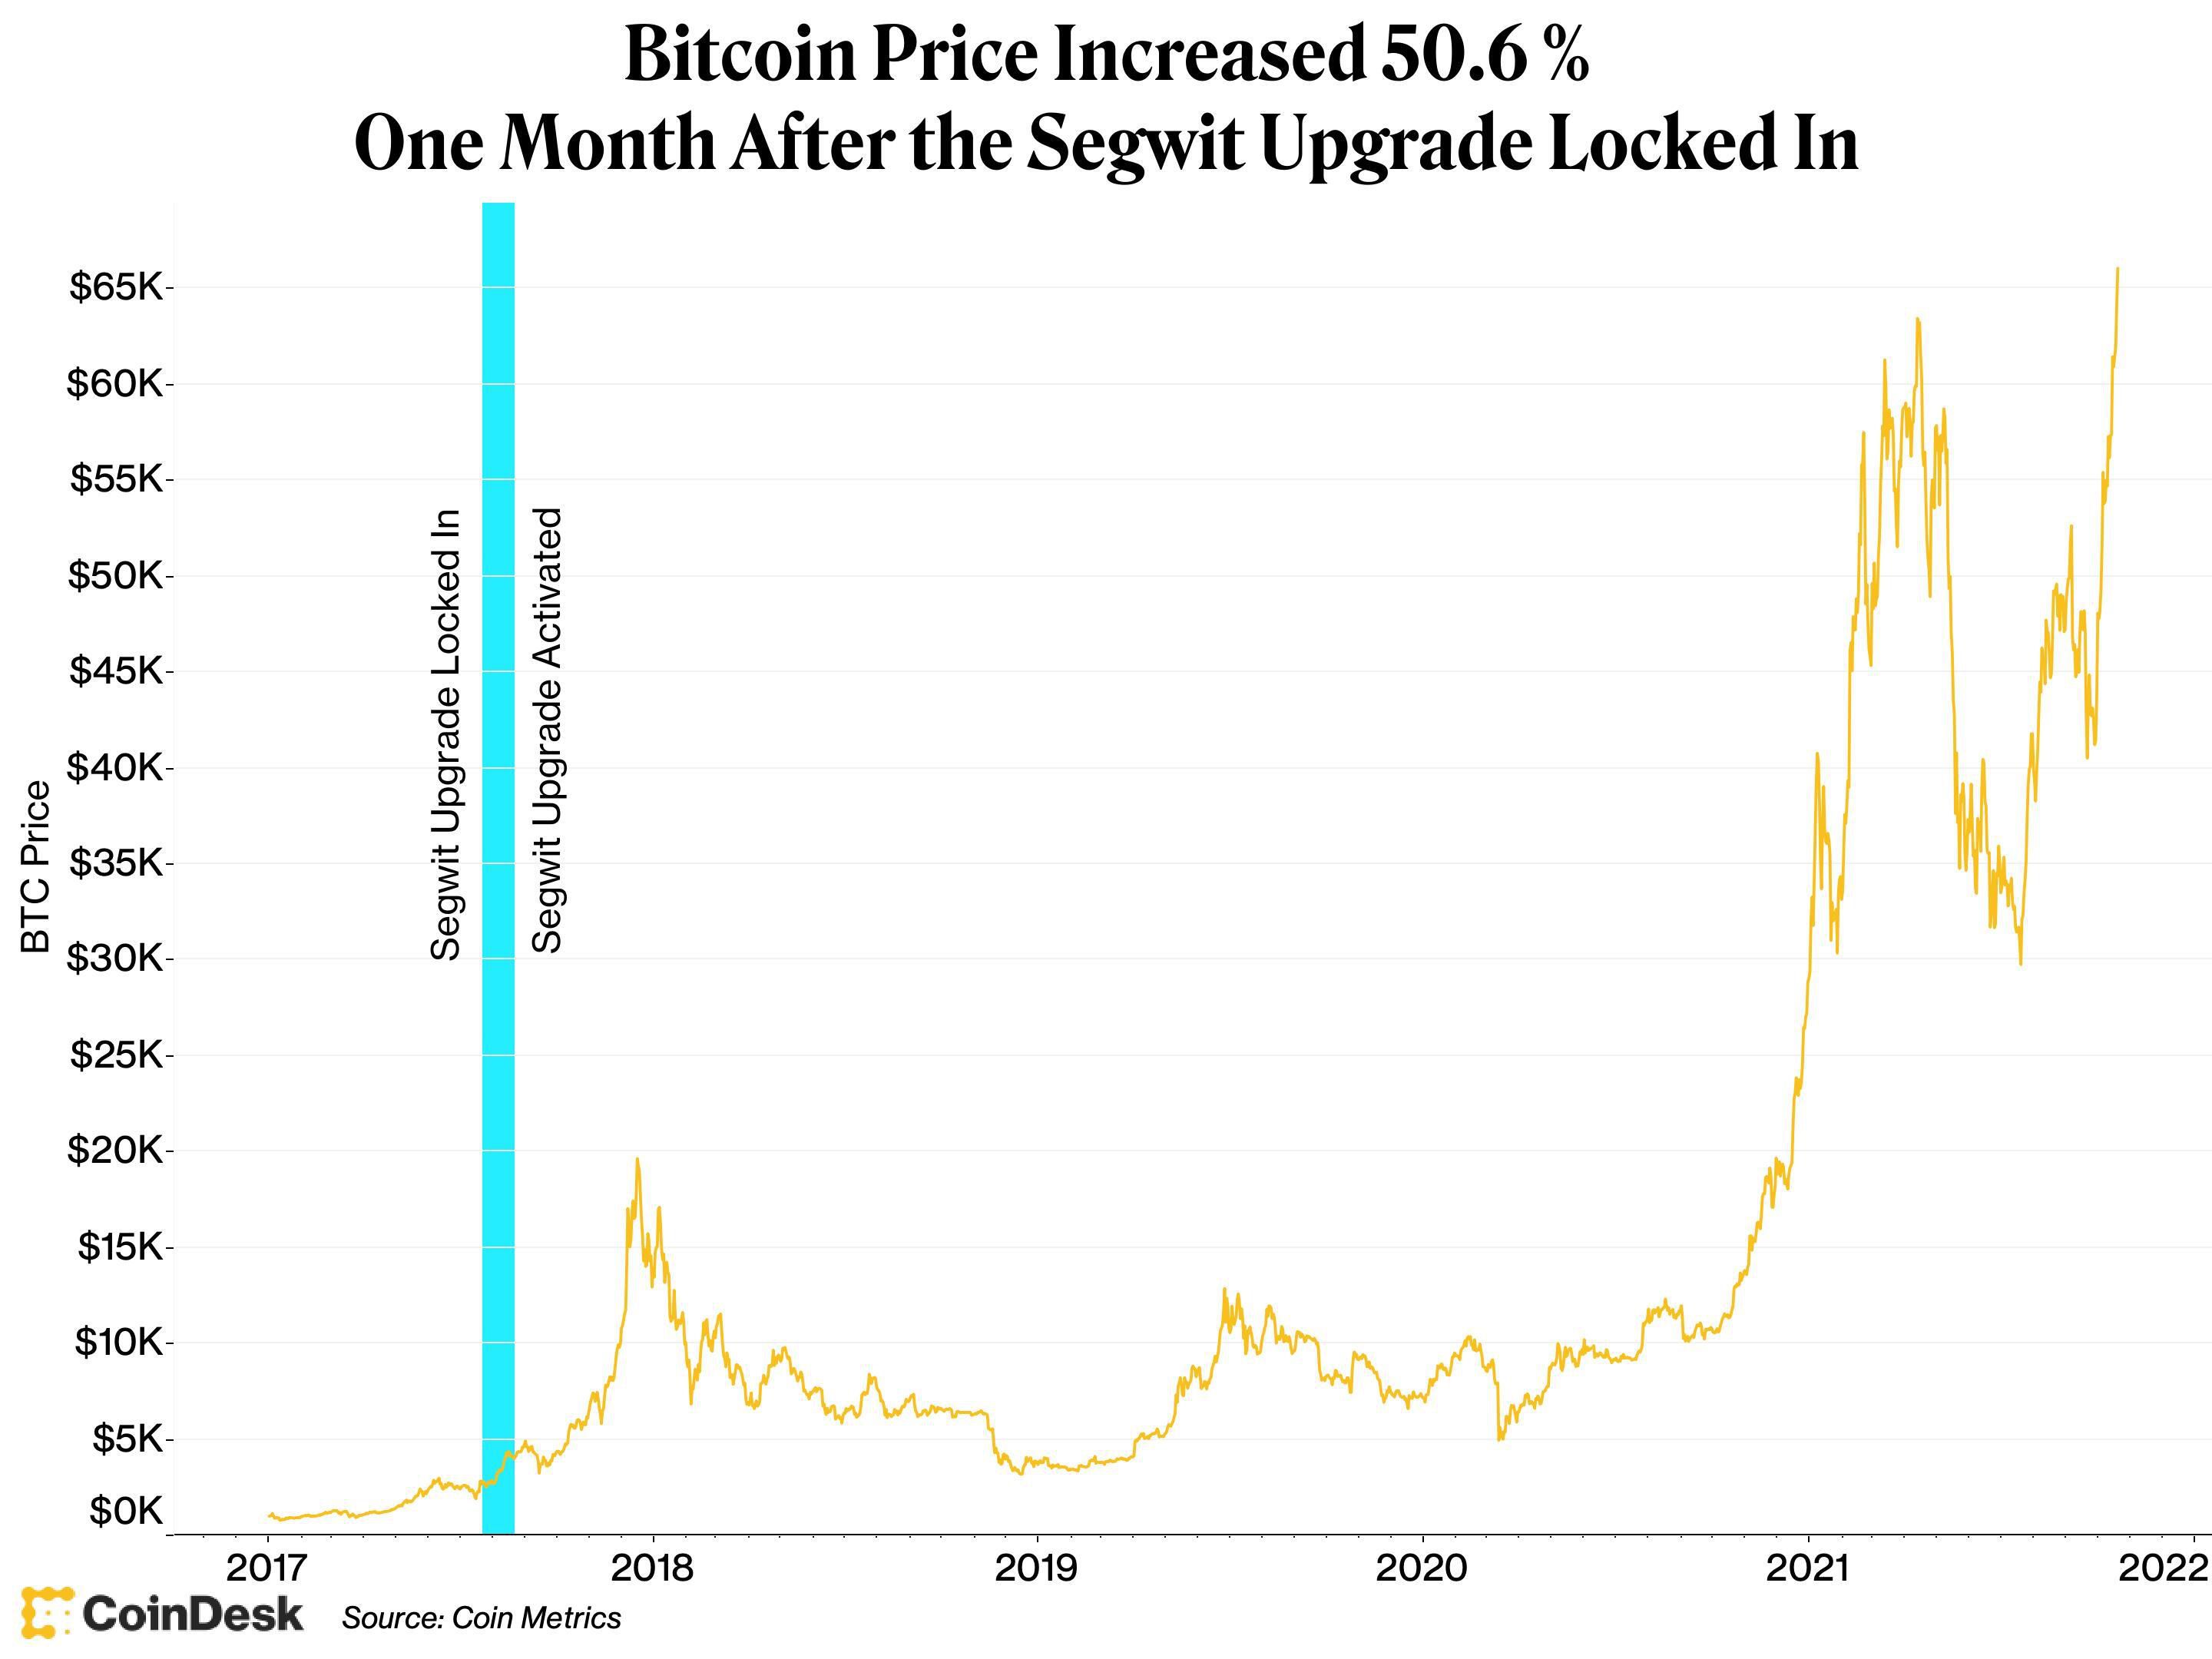 Turquoise vertical bar on bitcoin's price chart highlights the price impact of the SegWit upgrade in 2017. It was a big jump at the time, though the cryptocurrency's subsequent rally makes it look like a blip. (Shuai Hao/CoinDesk) 